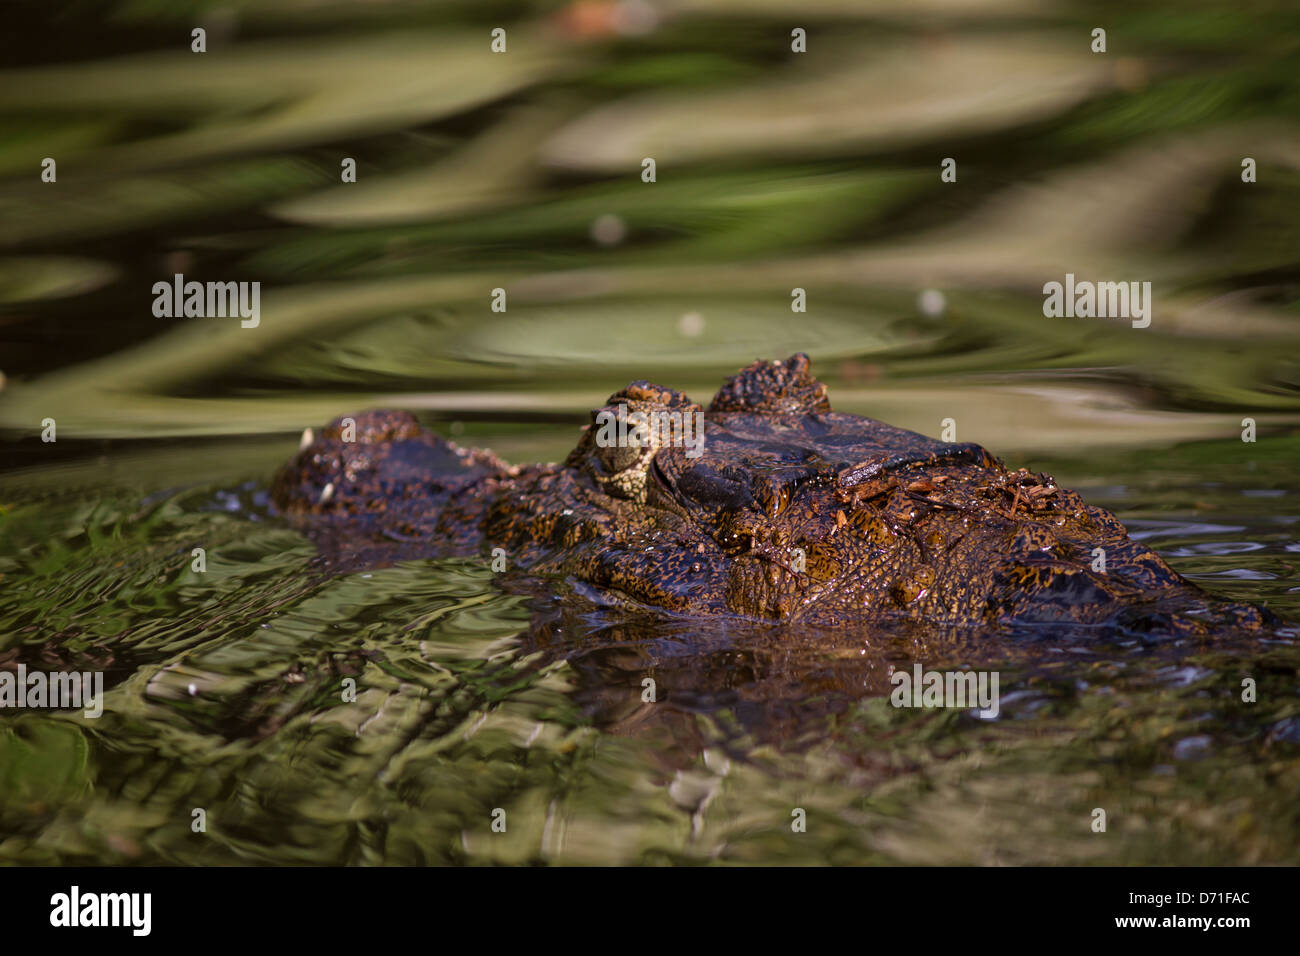 Spectacled Caiman (Caiman crocodilus), White Caiman or Common Caiman Stock Photo